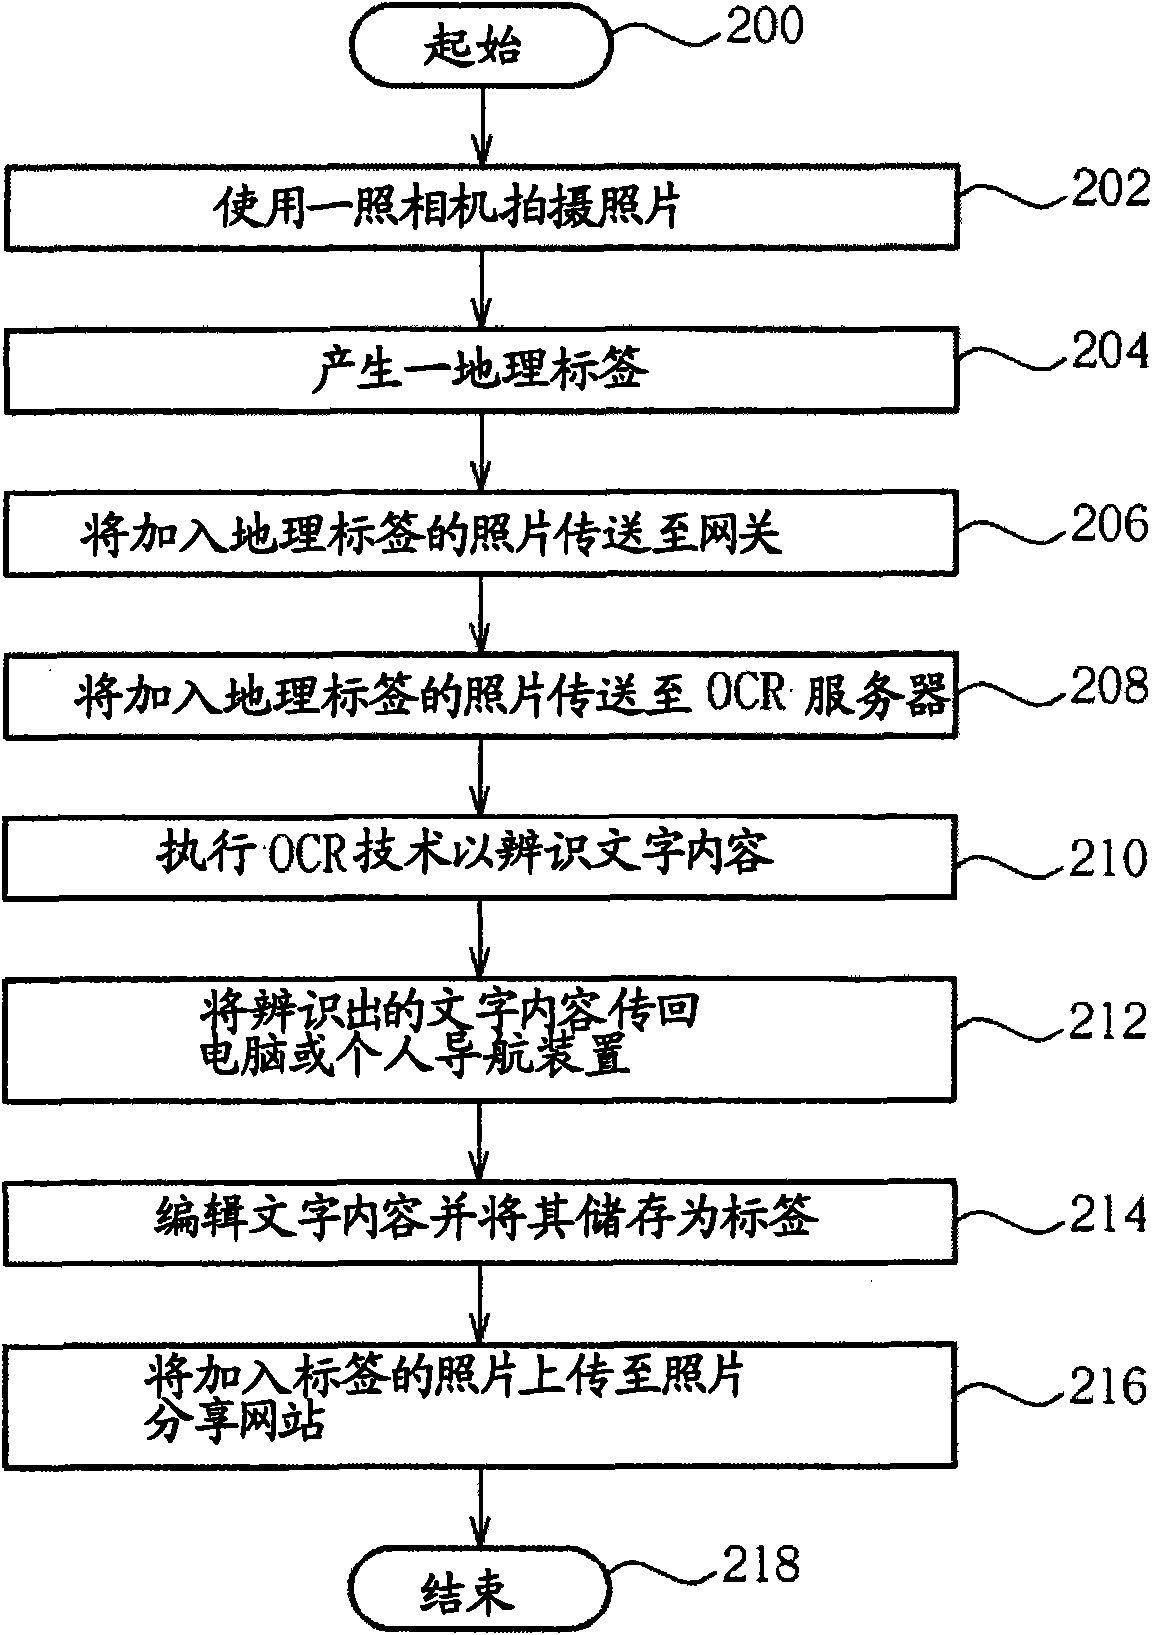 Personal navigation device and method for automatic adding label to photo